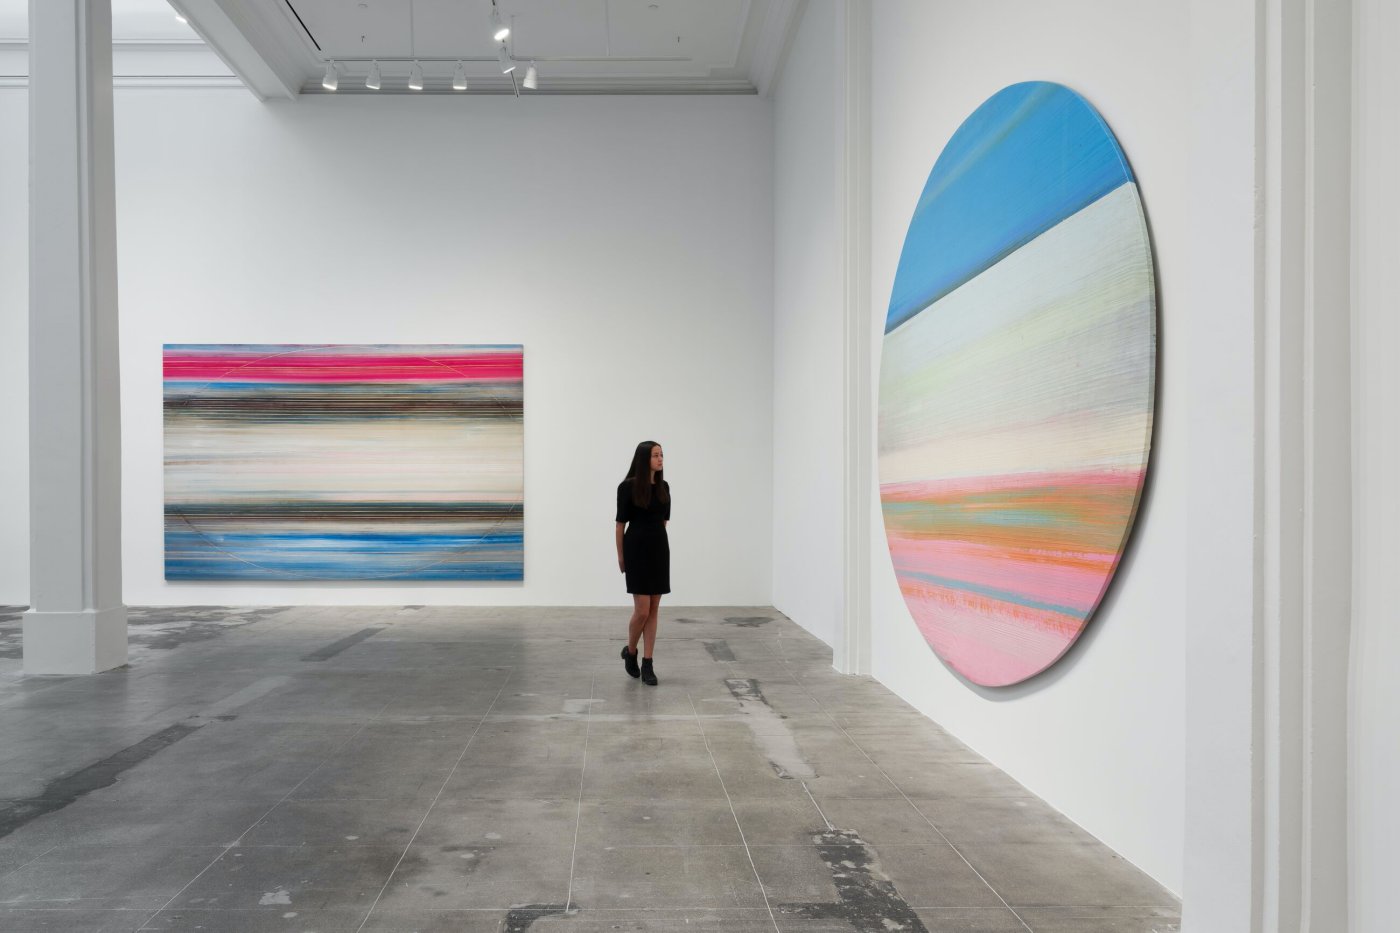 Installation image for Ed Clark: Expanding the Image, at Hauser & Wirth